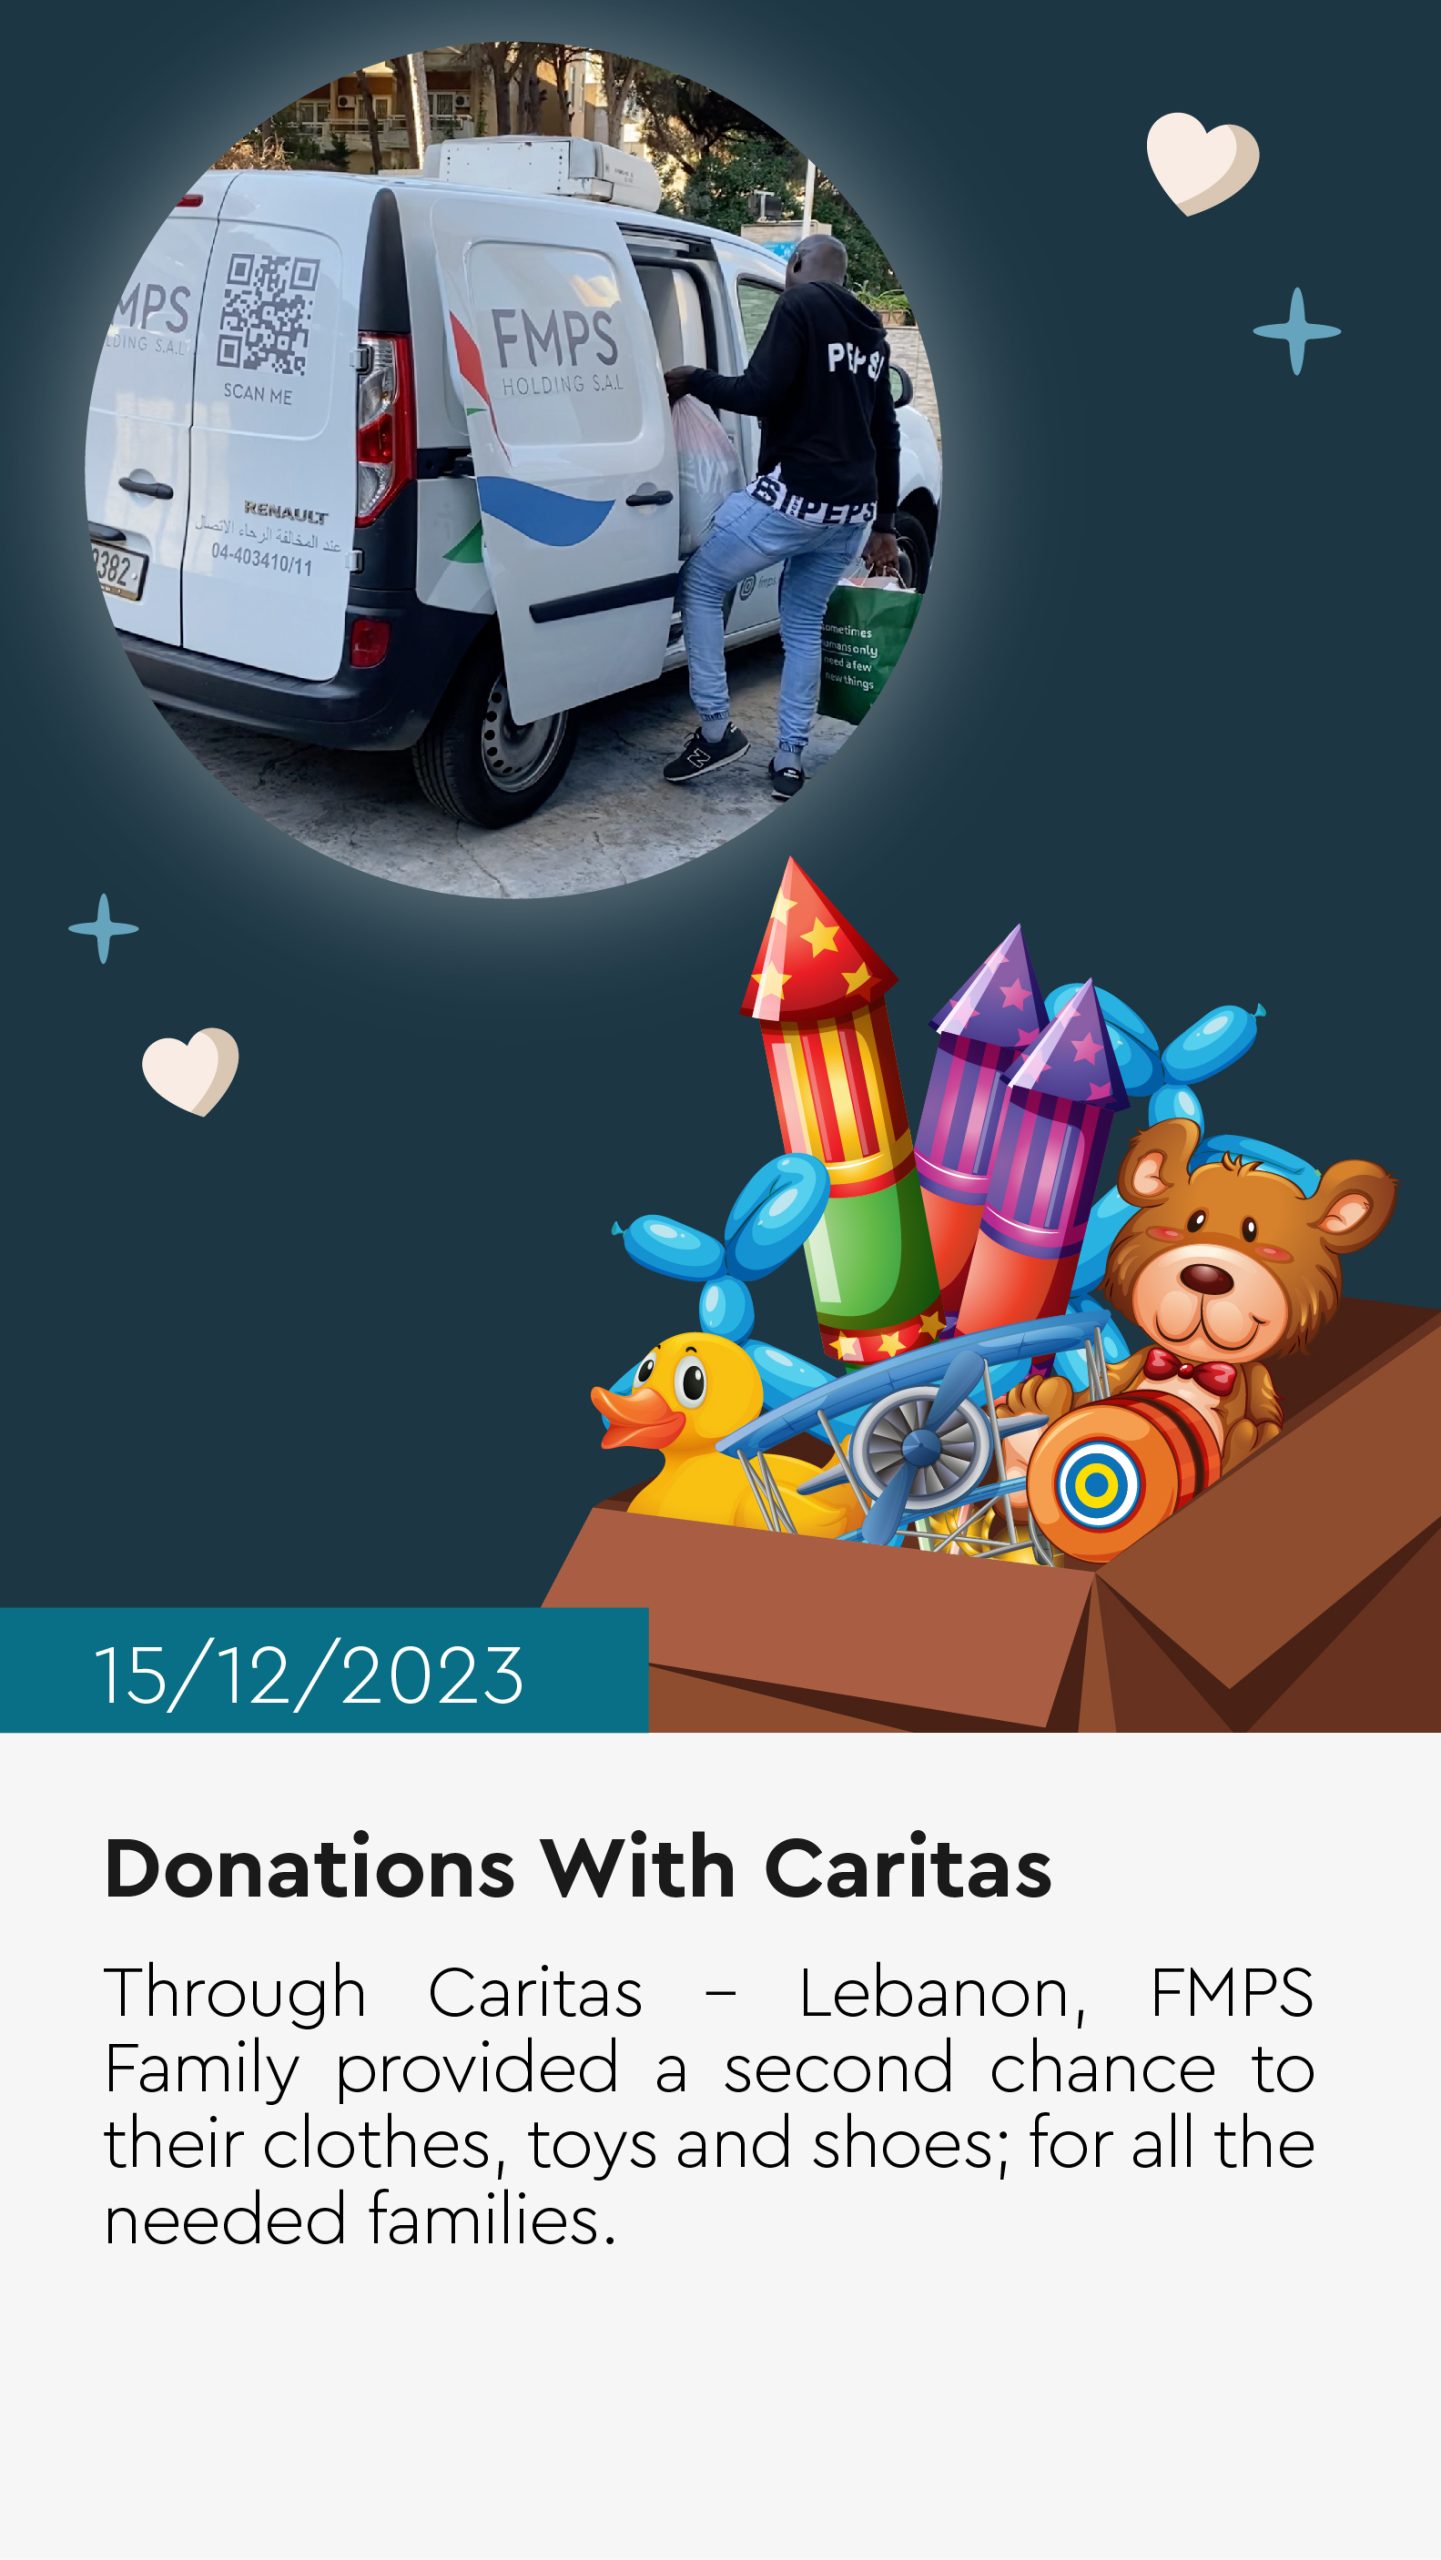 Through Caritas – Lebanon, FMPS Family provided a second chance for their clothes, toys and shoes to families in need.